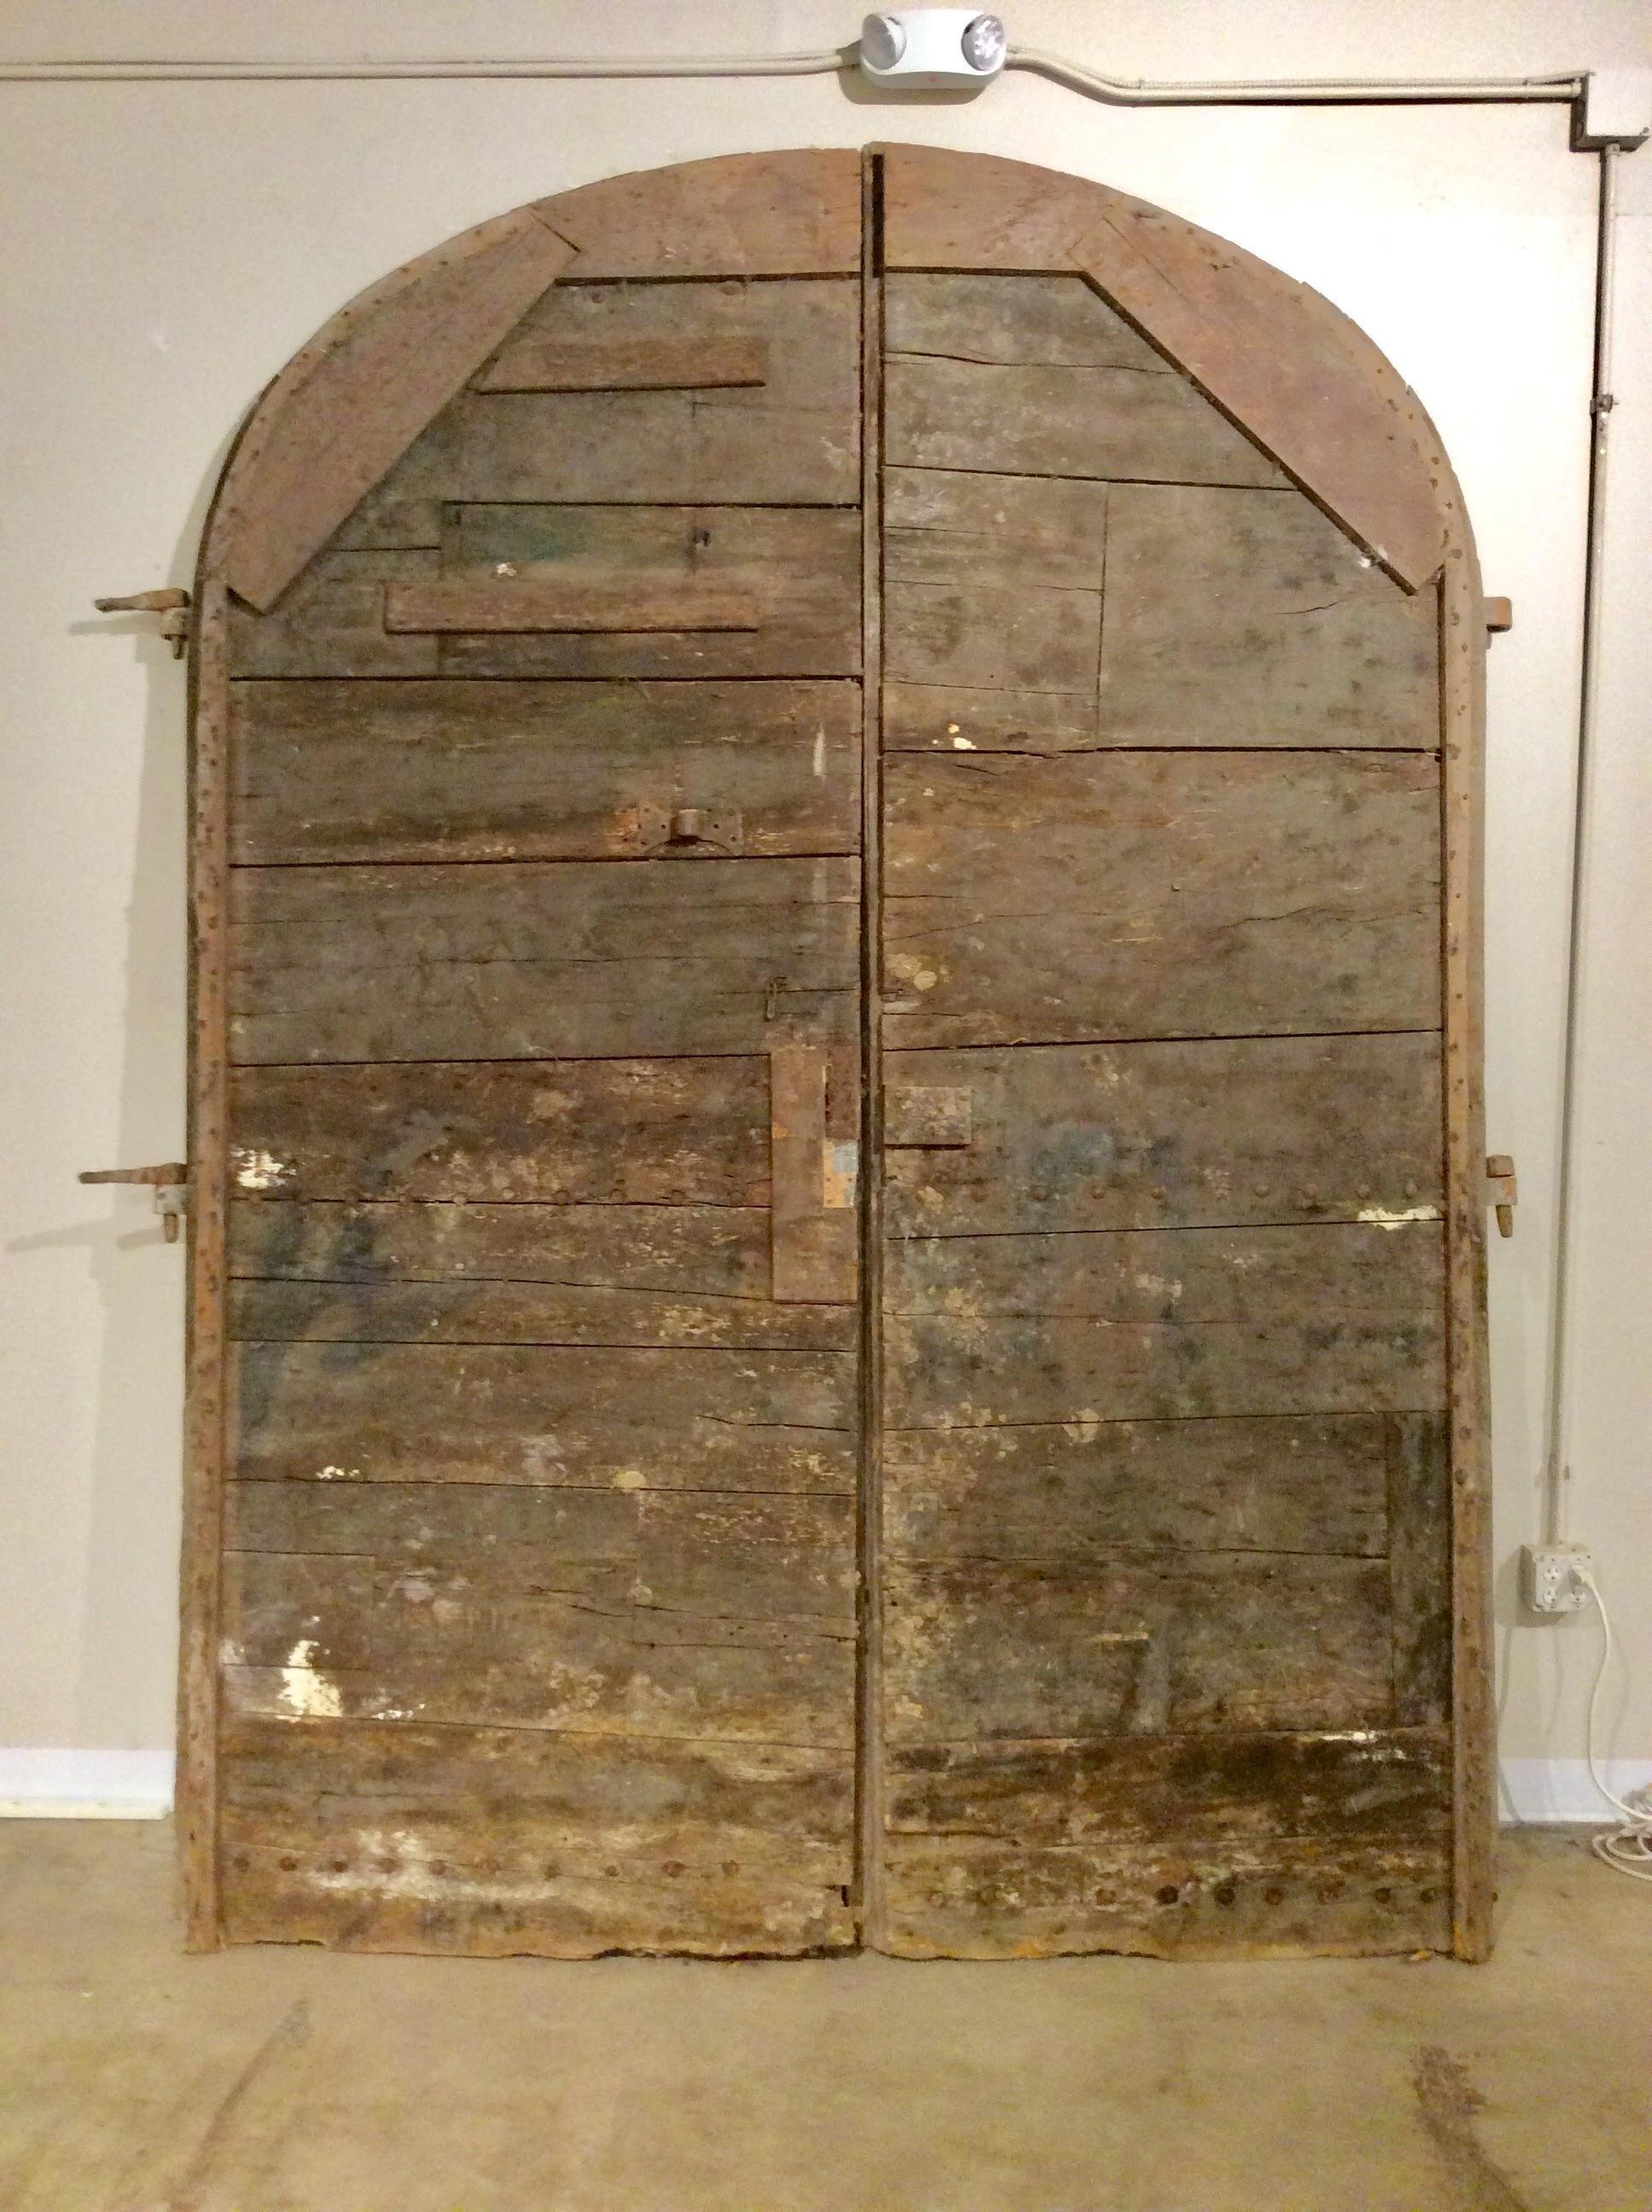 Early 1800s French Architectural Arched Wood Doors With Original Iron Hardware 2